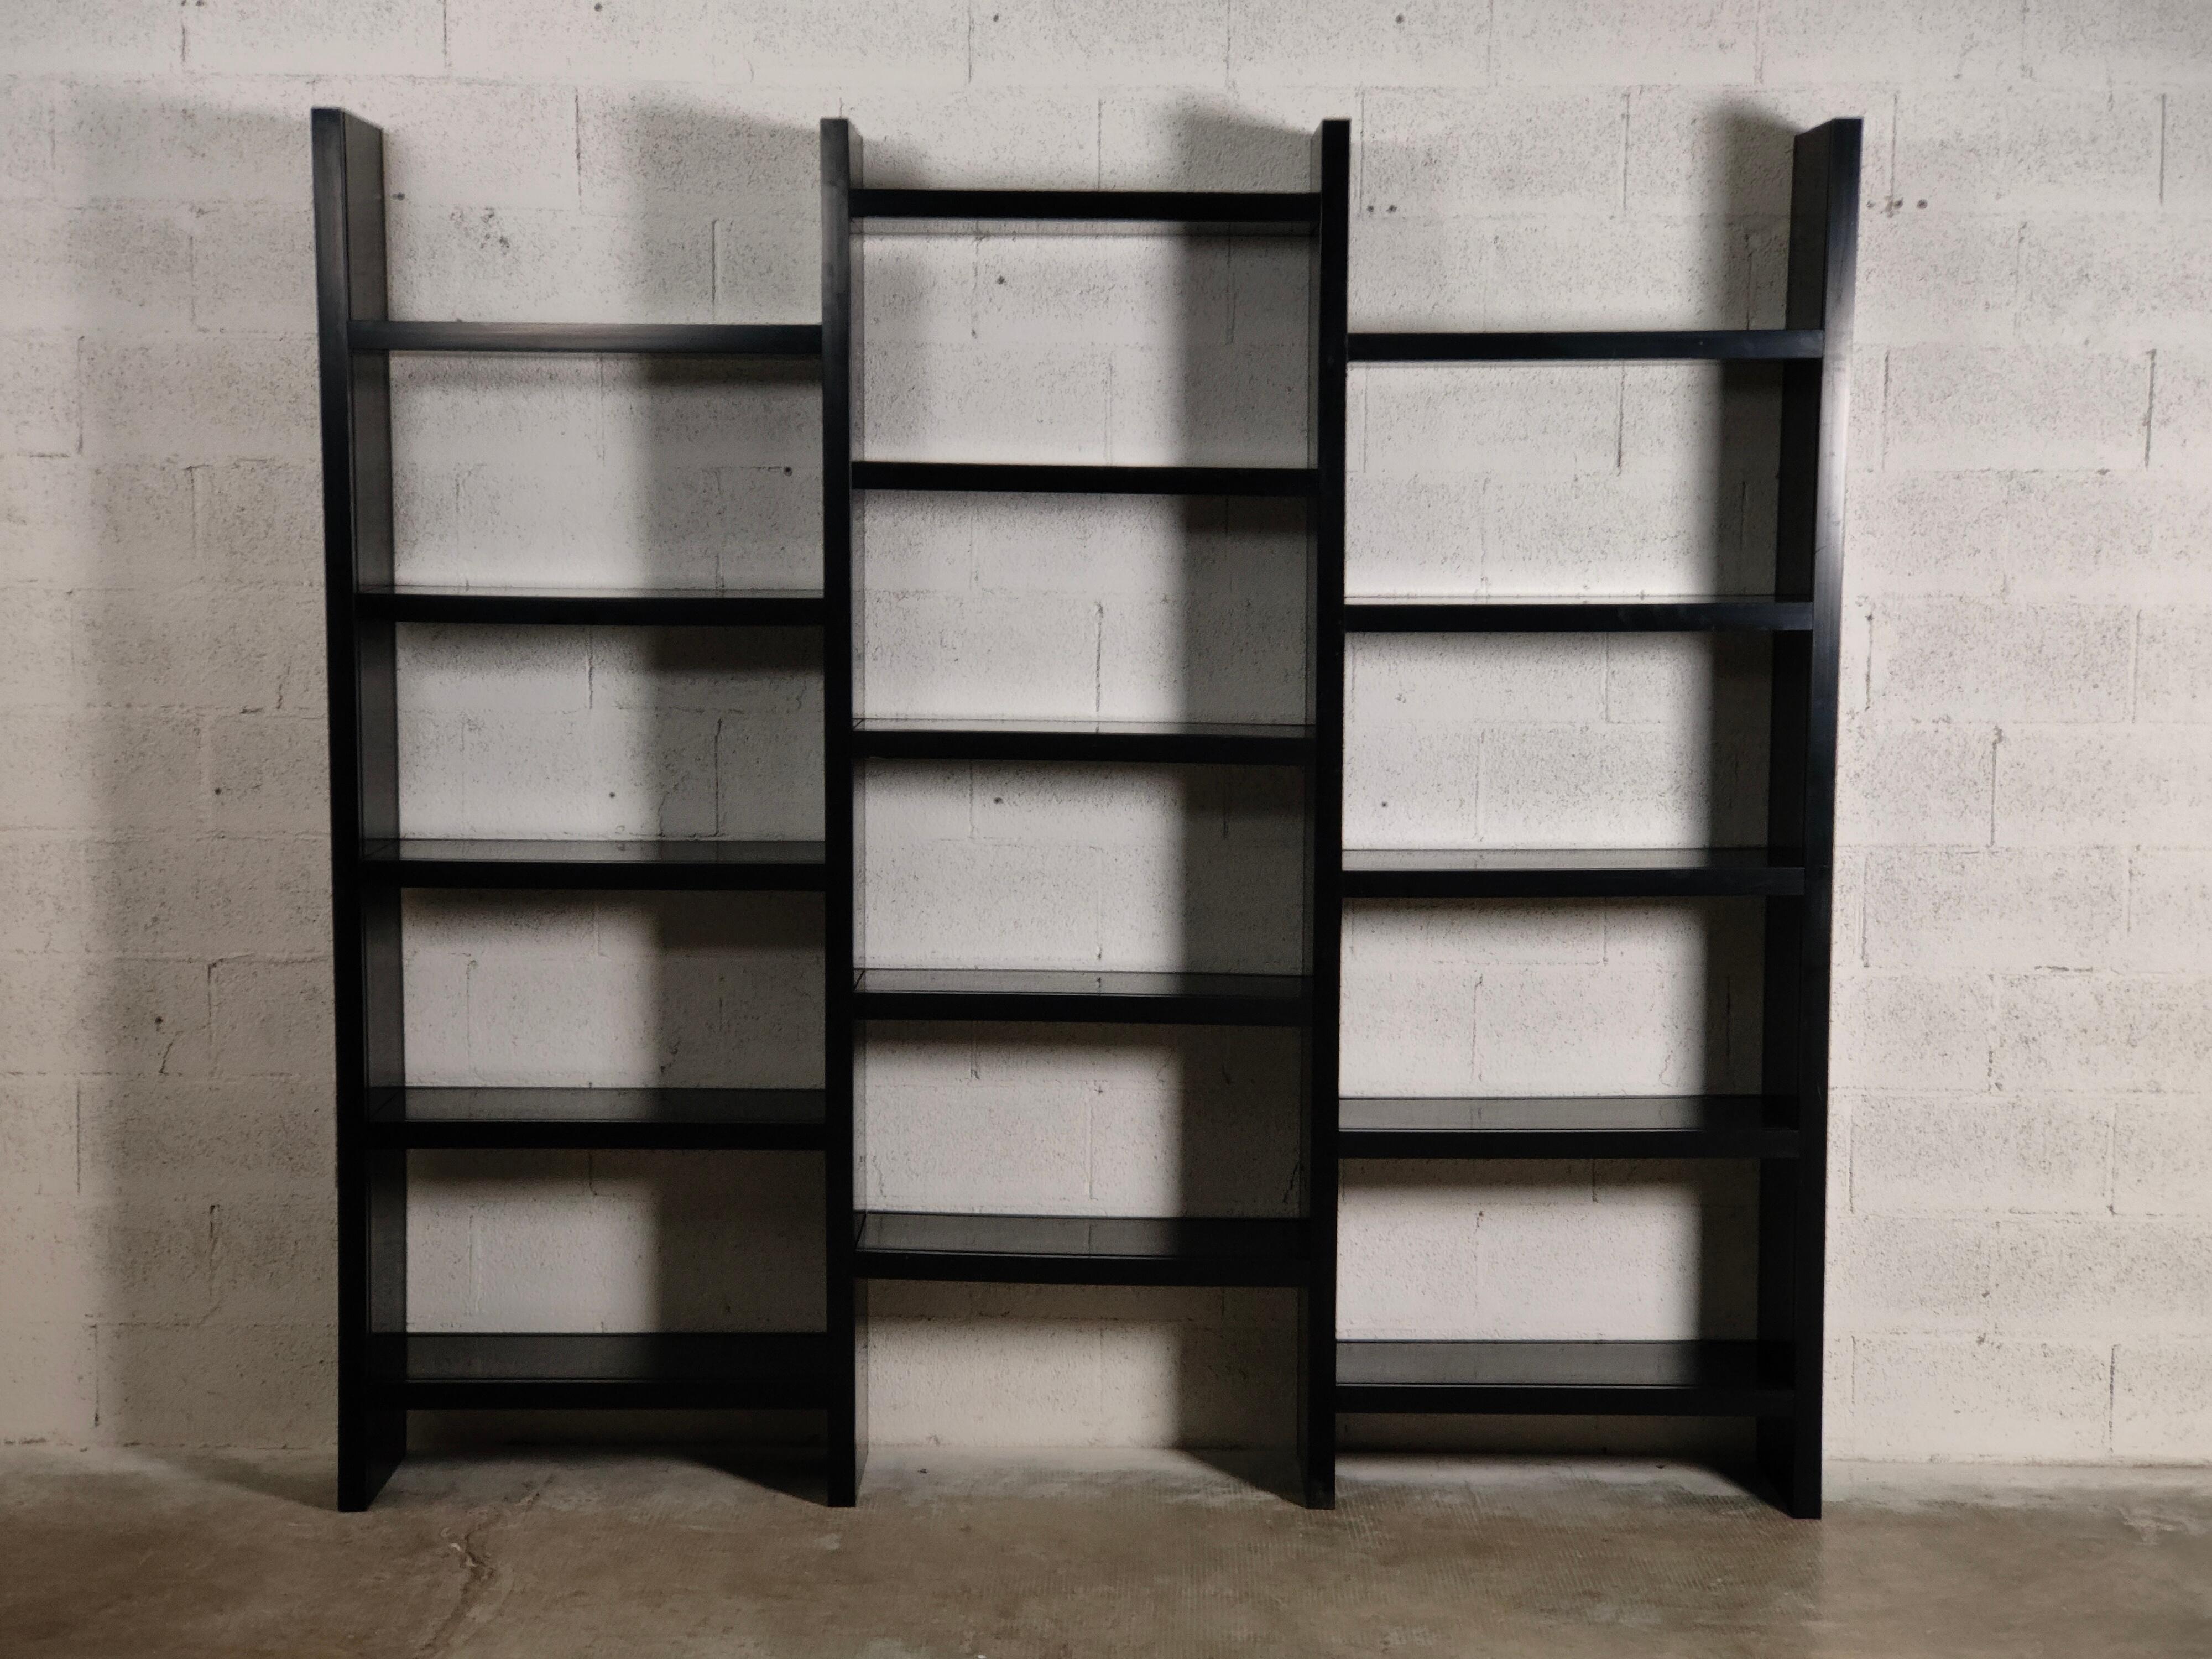 Modular bookcase with adjustable shelves. Plastic material.
The legendary Italian company Artemide was founded in the province of Milan in 1959 by the designer and engineer Ernesto Gismondi, born in Sanremo in 1931, and by the designer Sergio Mazza,